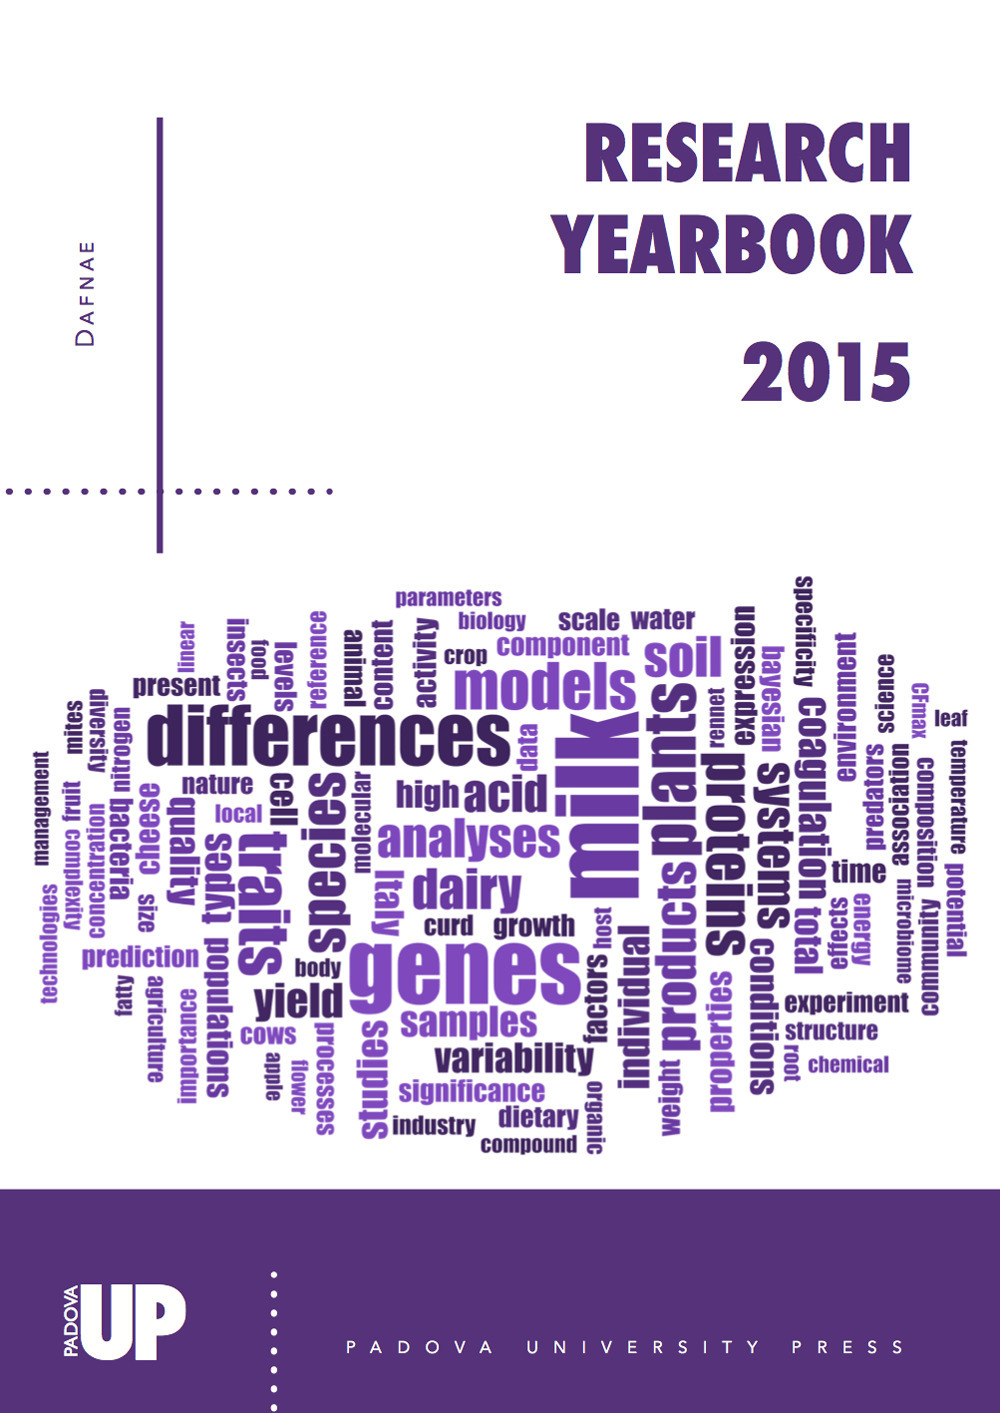 Research yearbook 2015